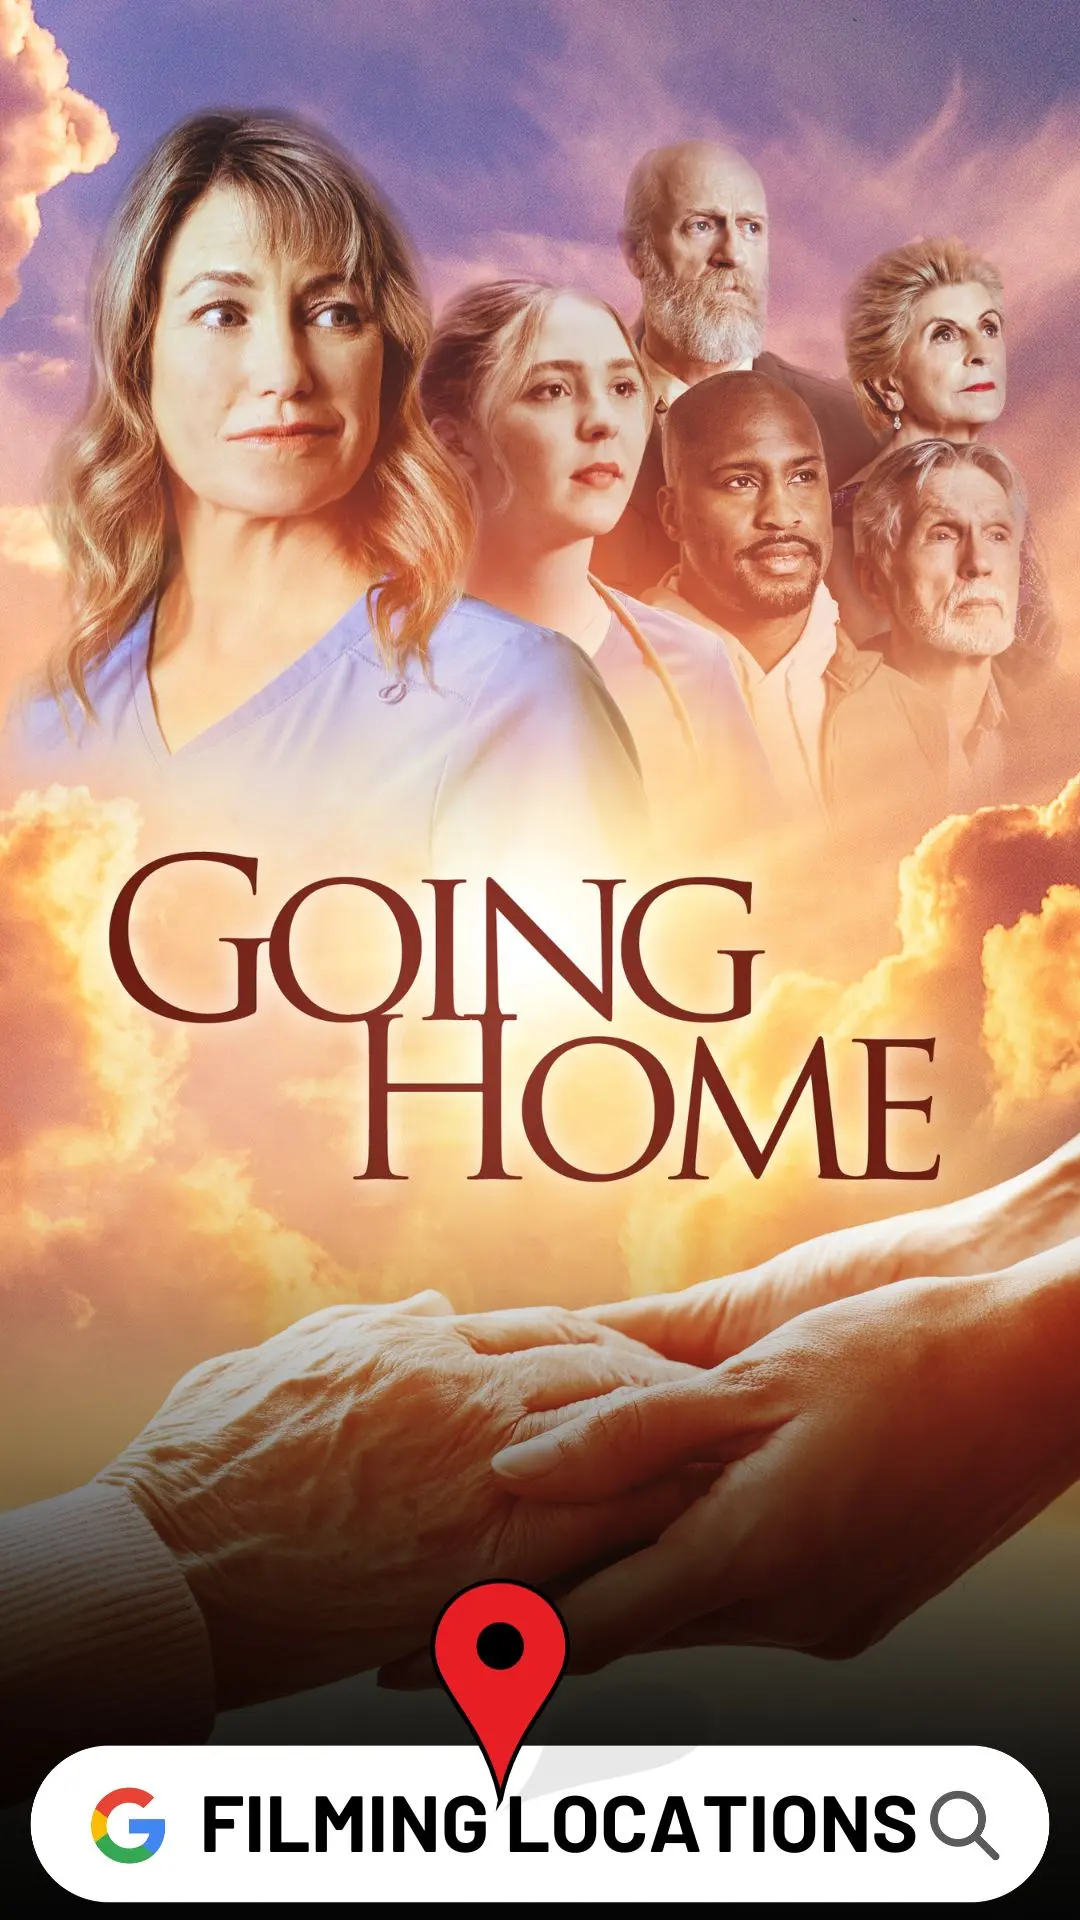 Going Home Filming Locations